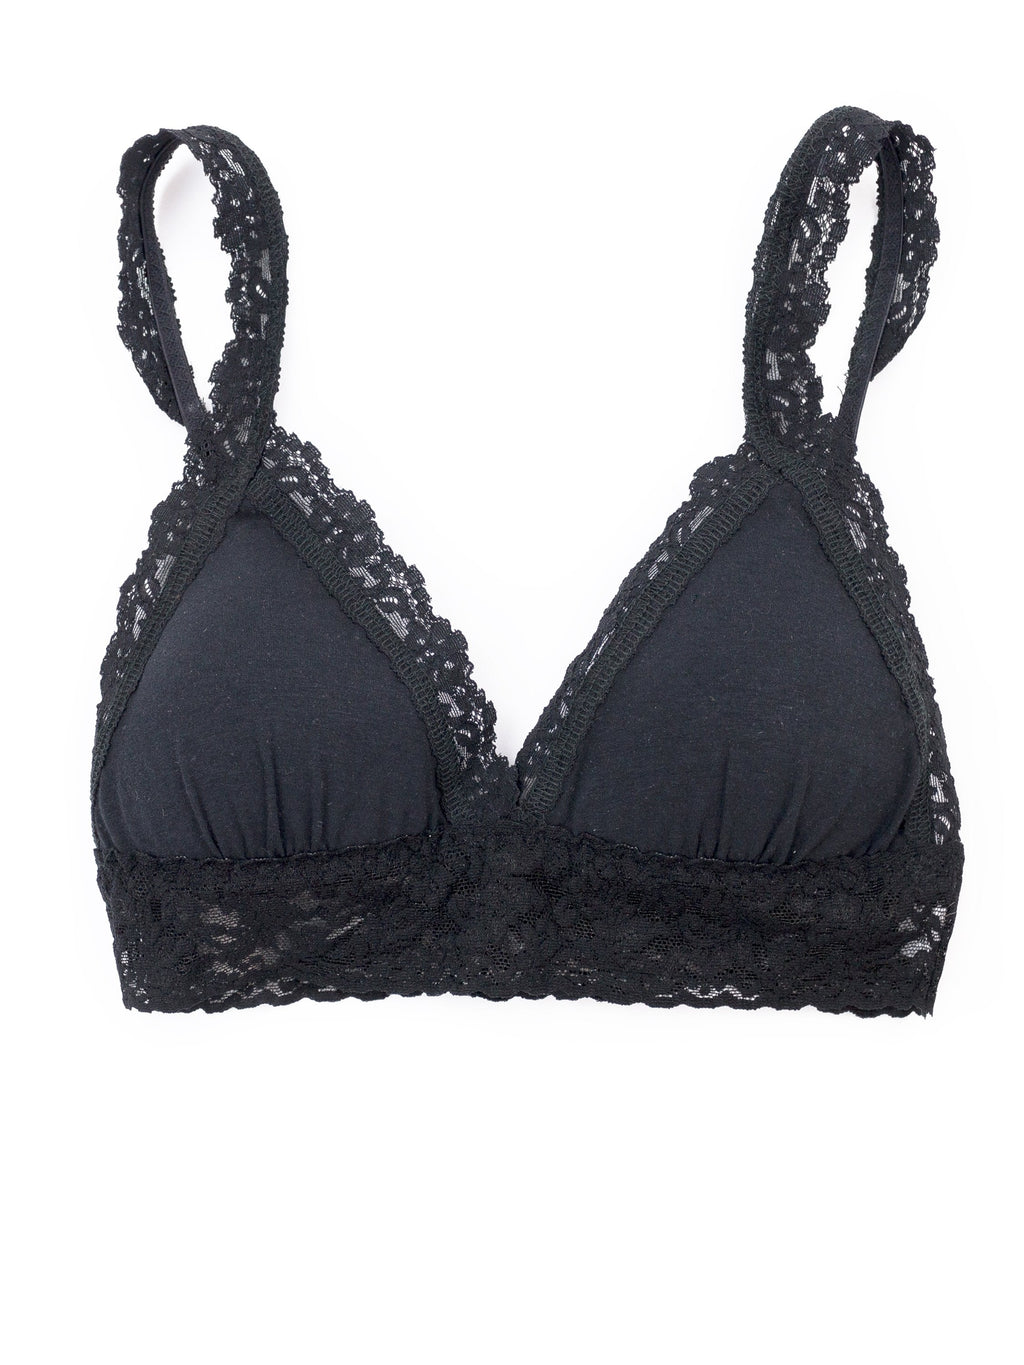 Lace Bandeau Bralette – Sassy Bee